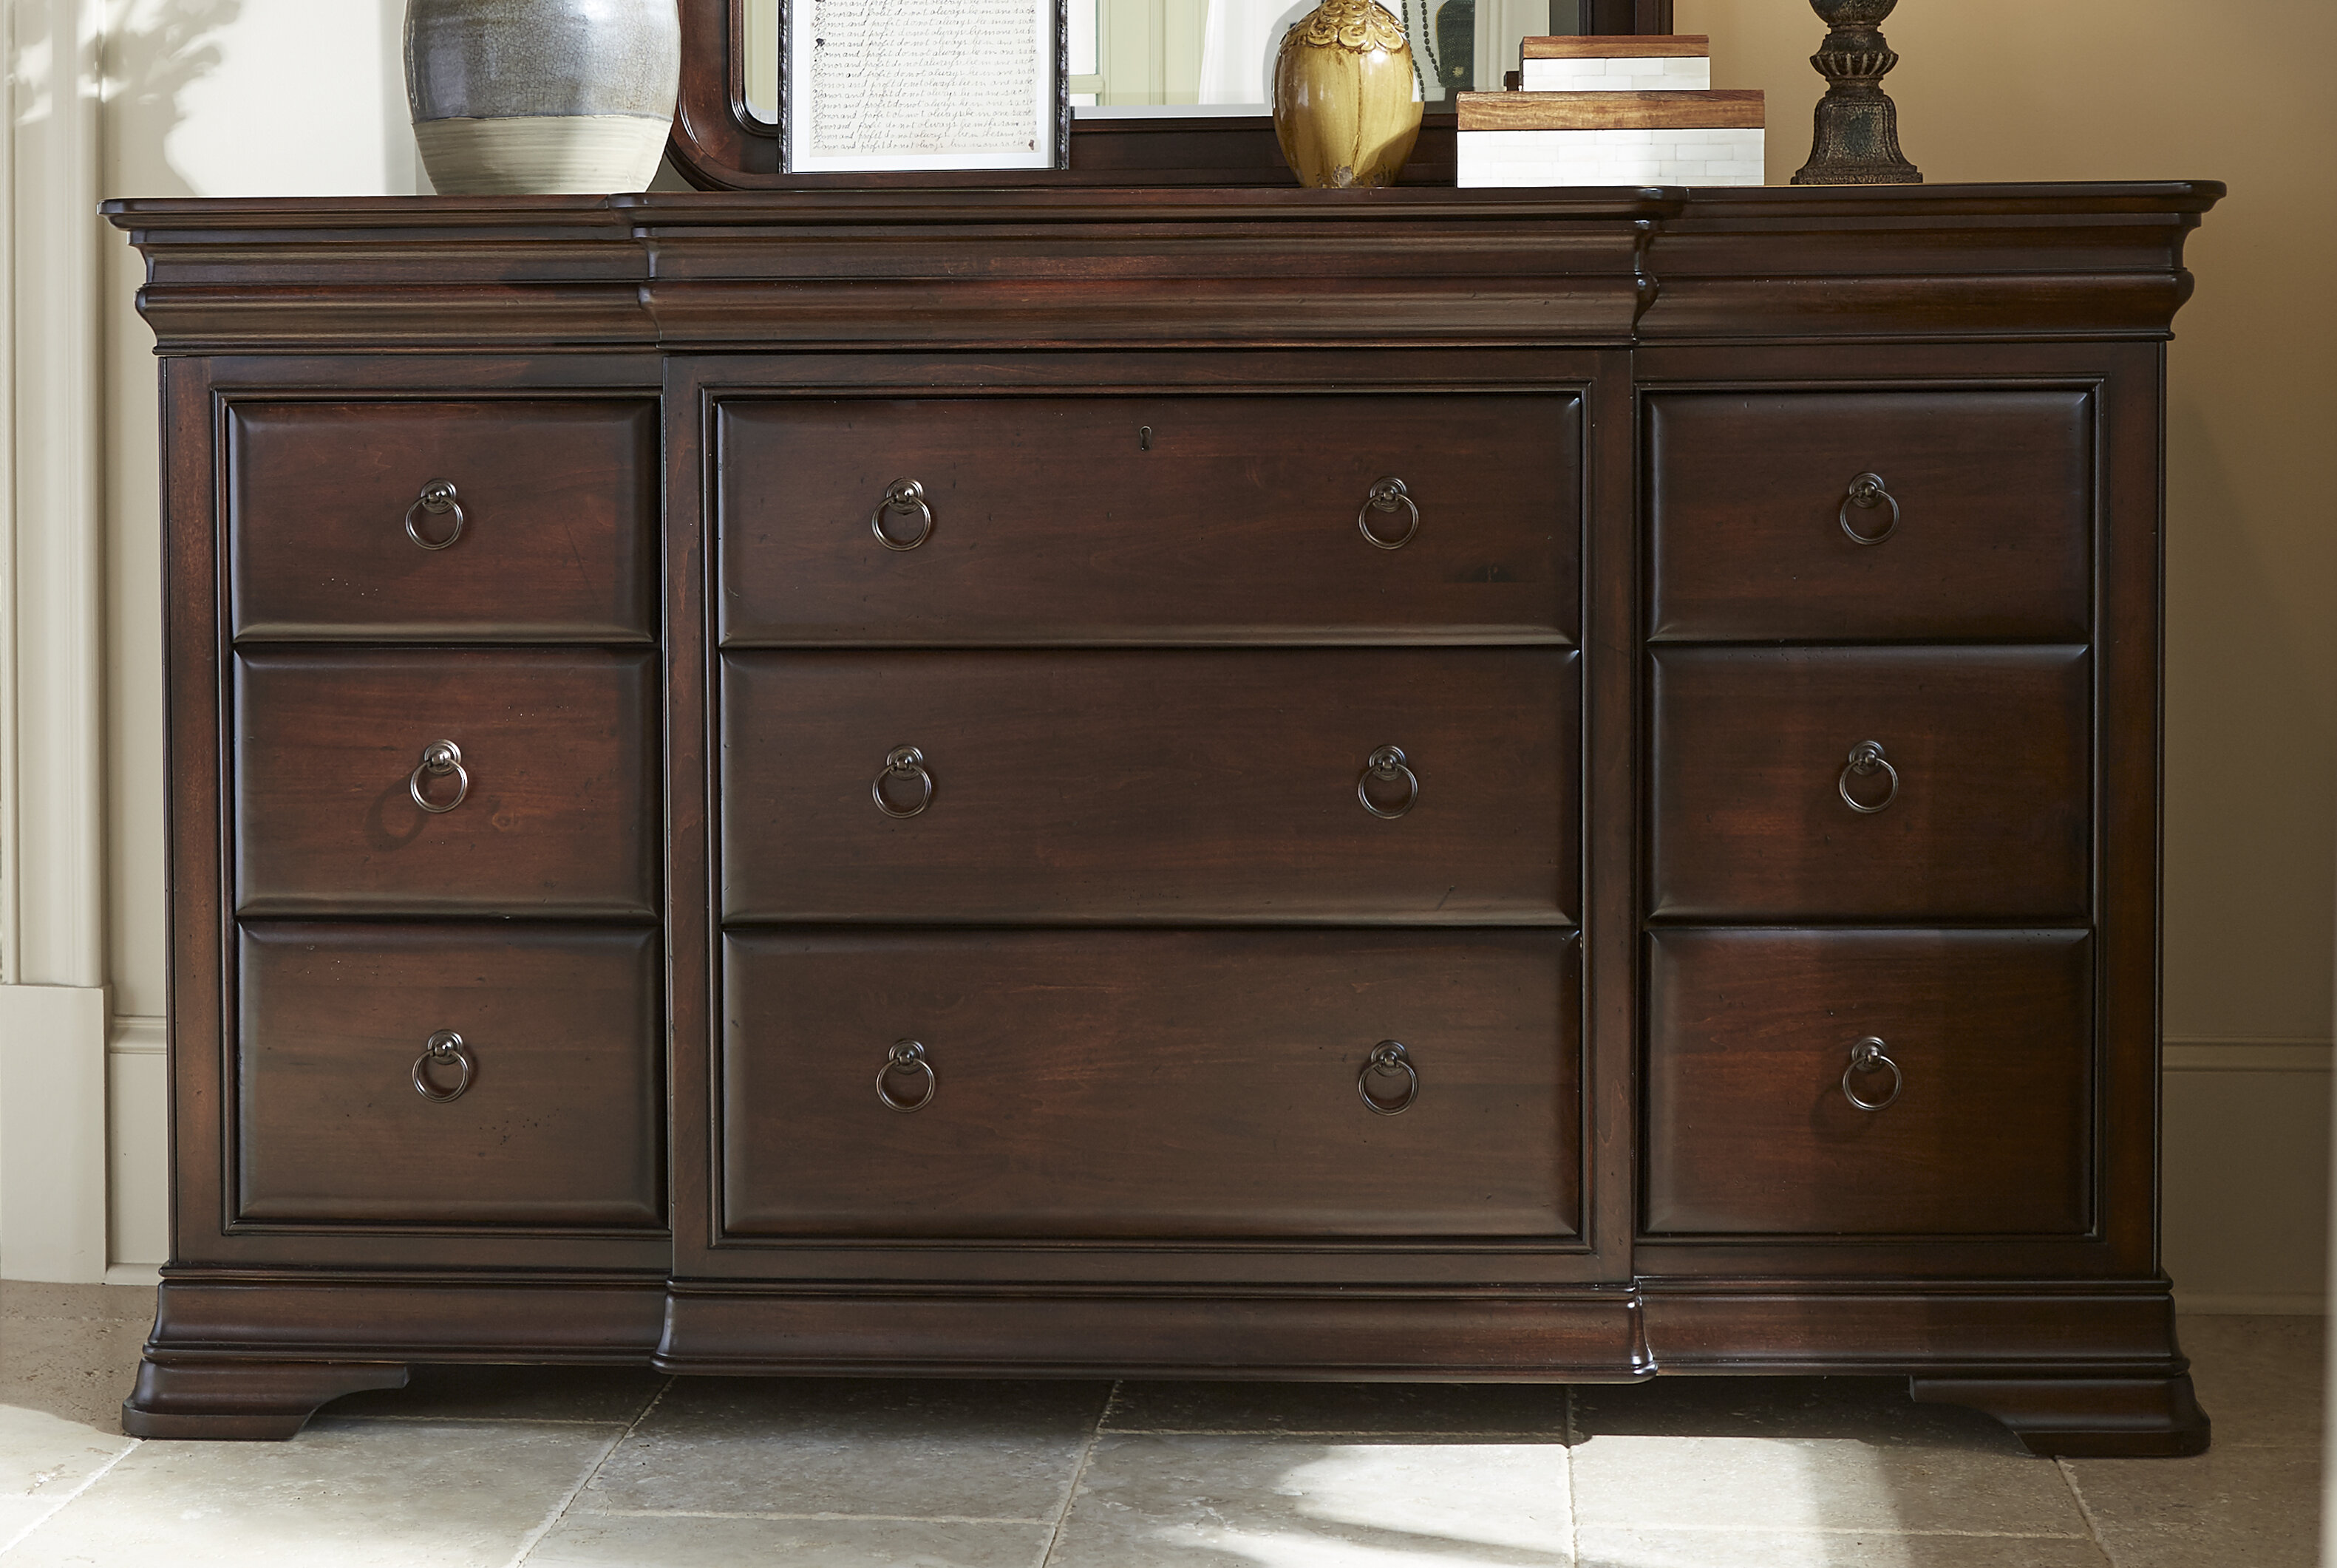 Darby Home Co Baily 12 Drawer Standard Dresser Chest Reviews